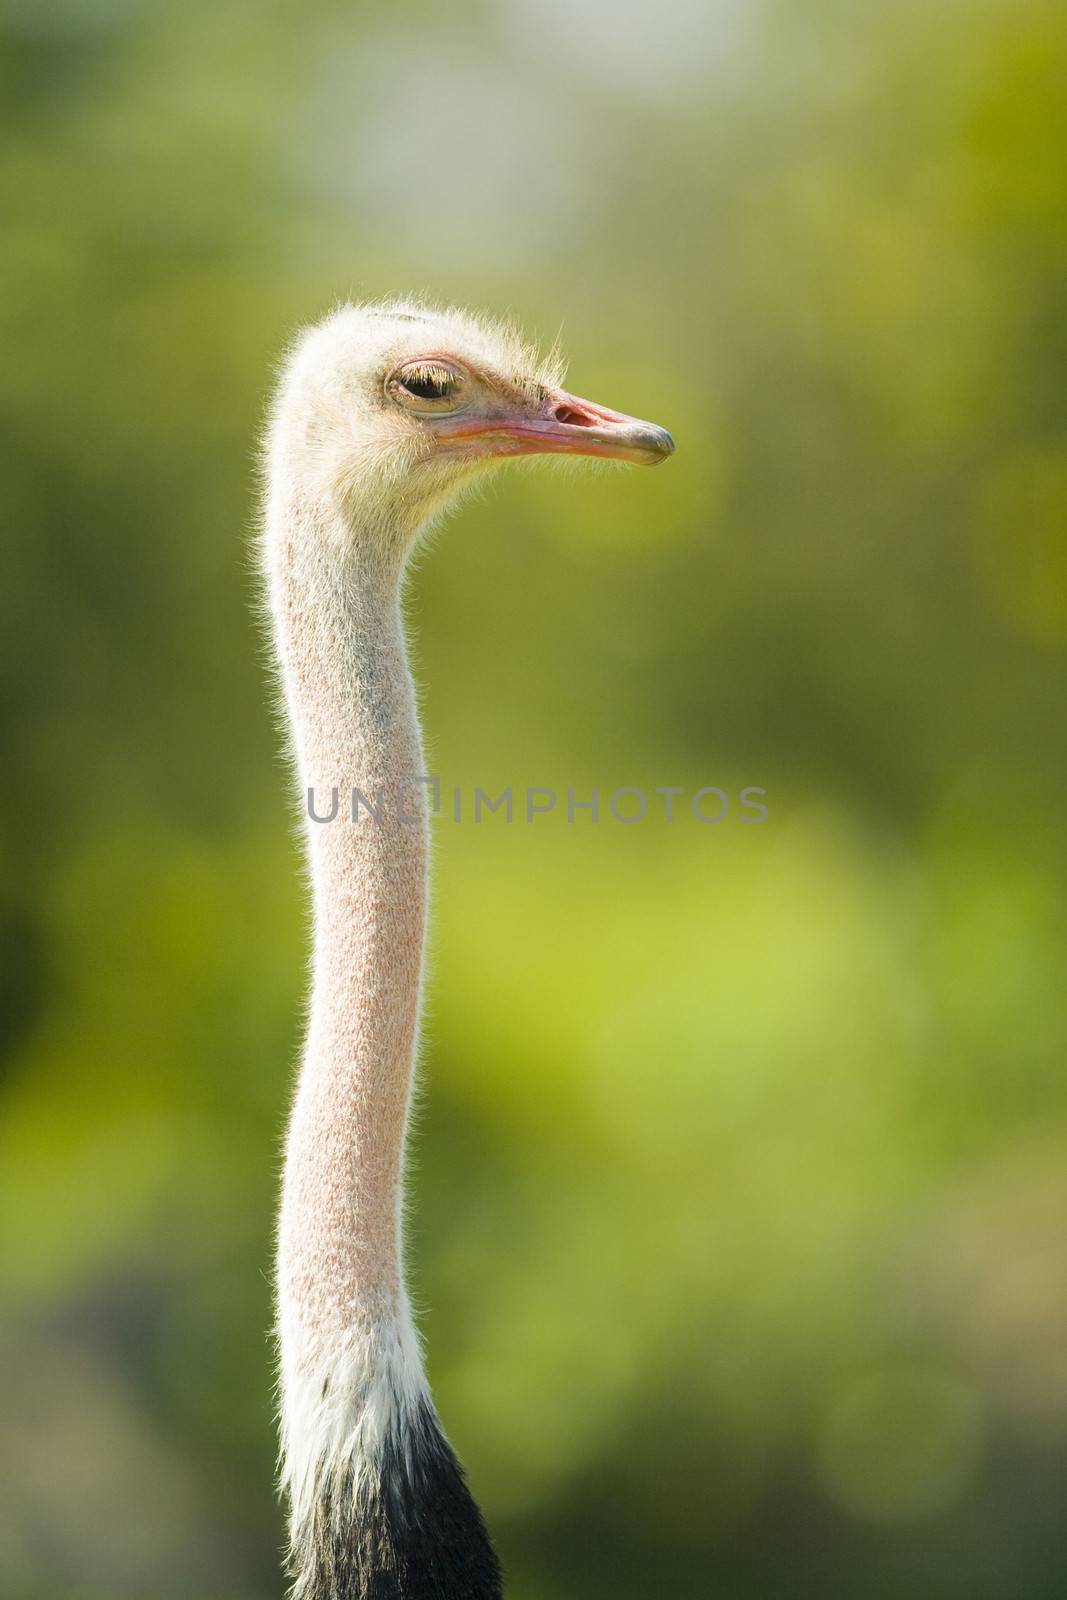 Close-up of a head of an Ostrich (Struthio camelus)